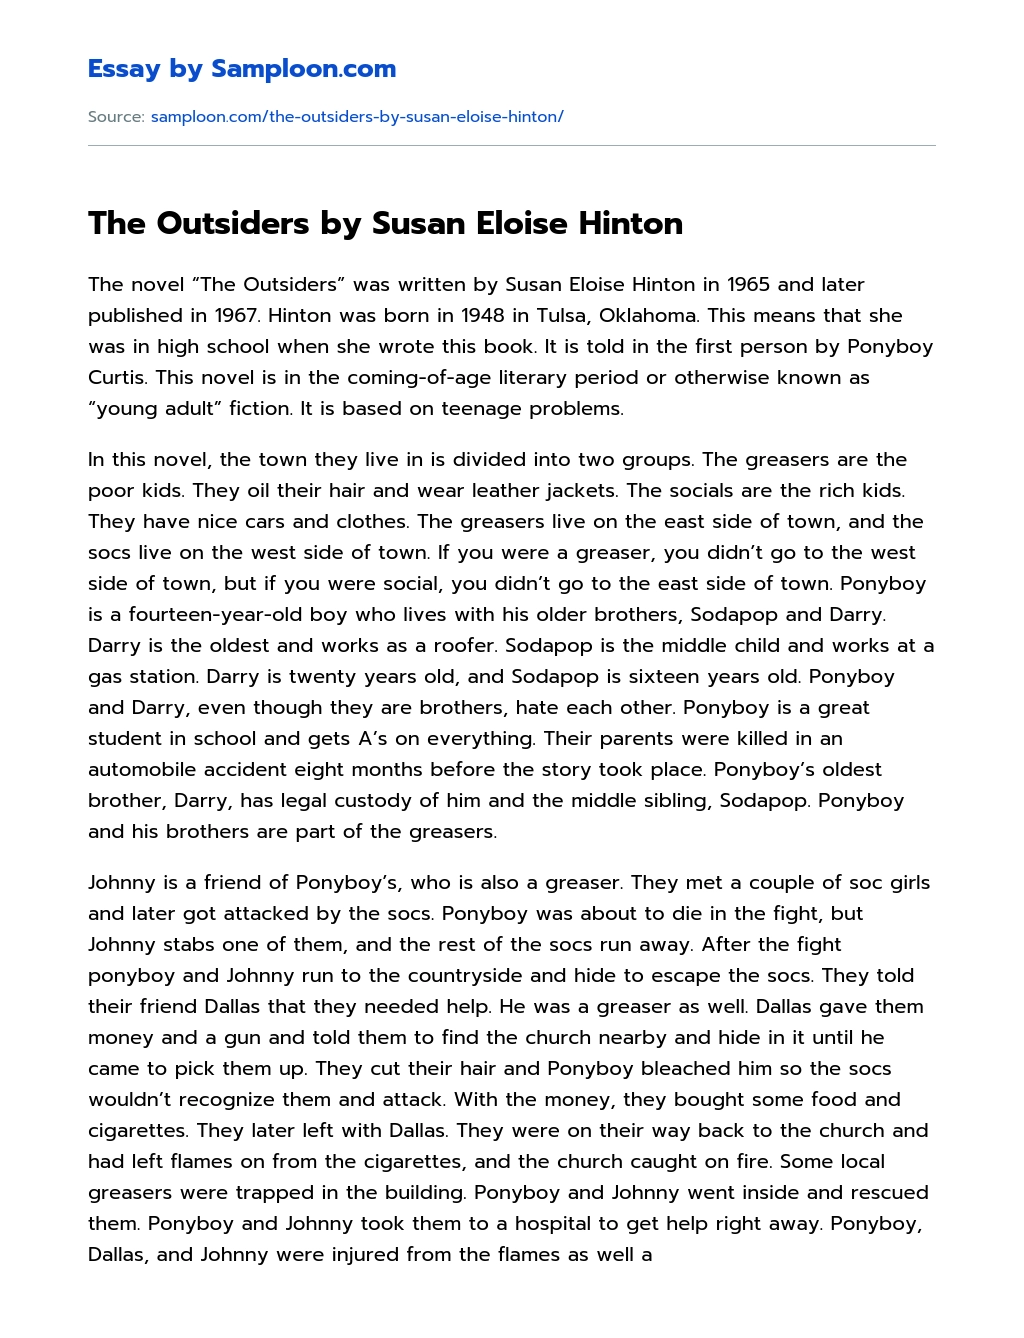 The Outsiders by Susan Eloise Hinton Book Review essay